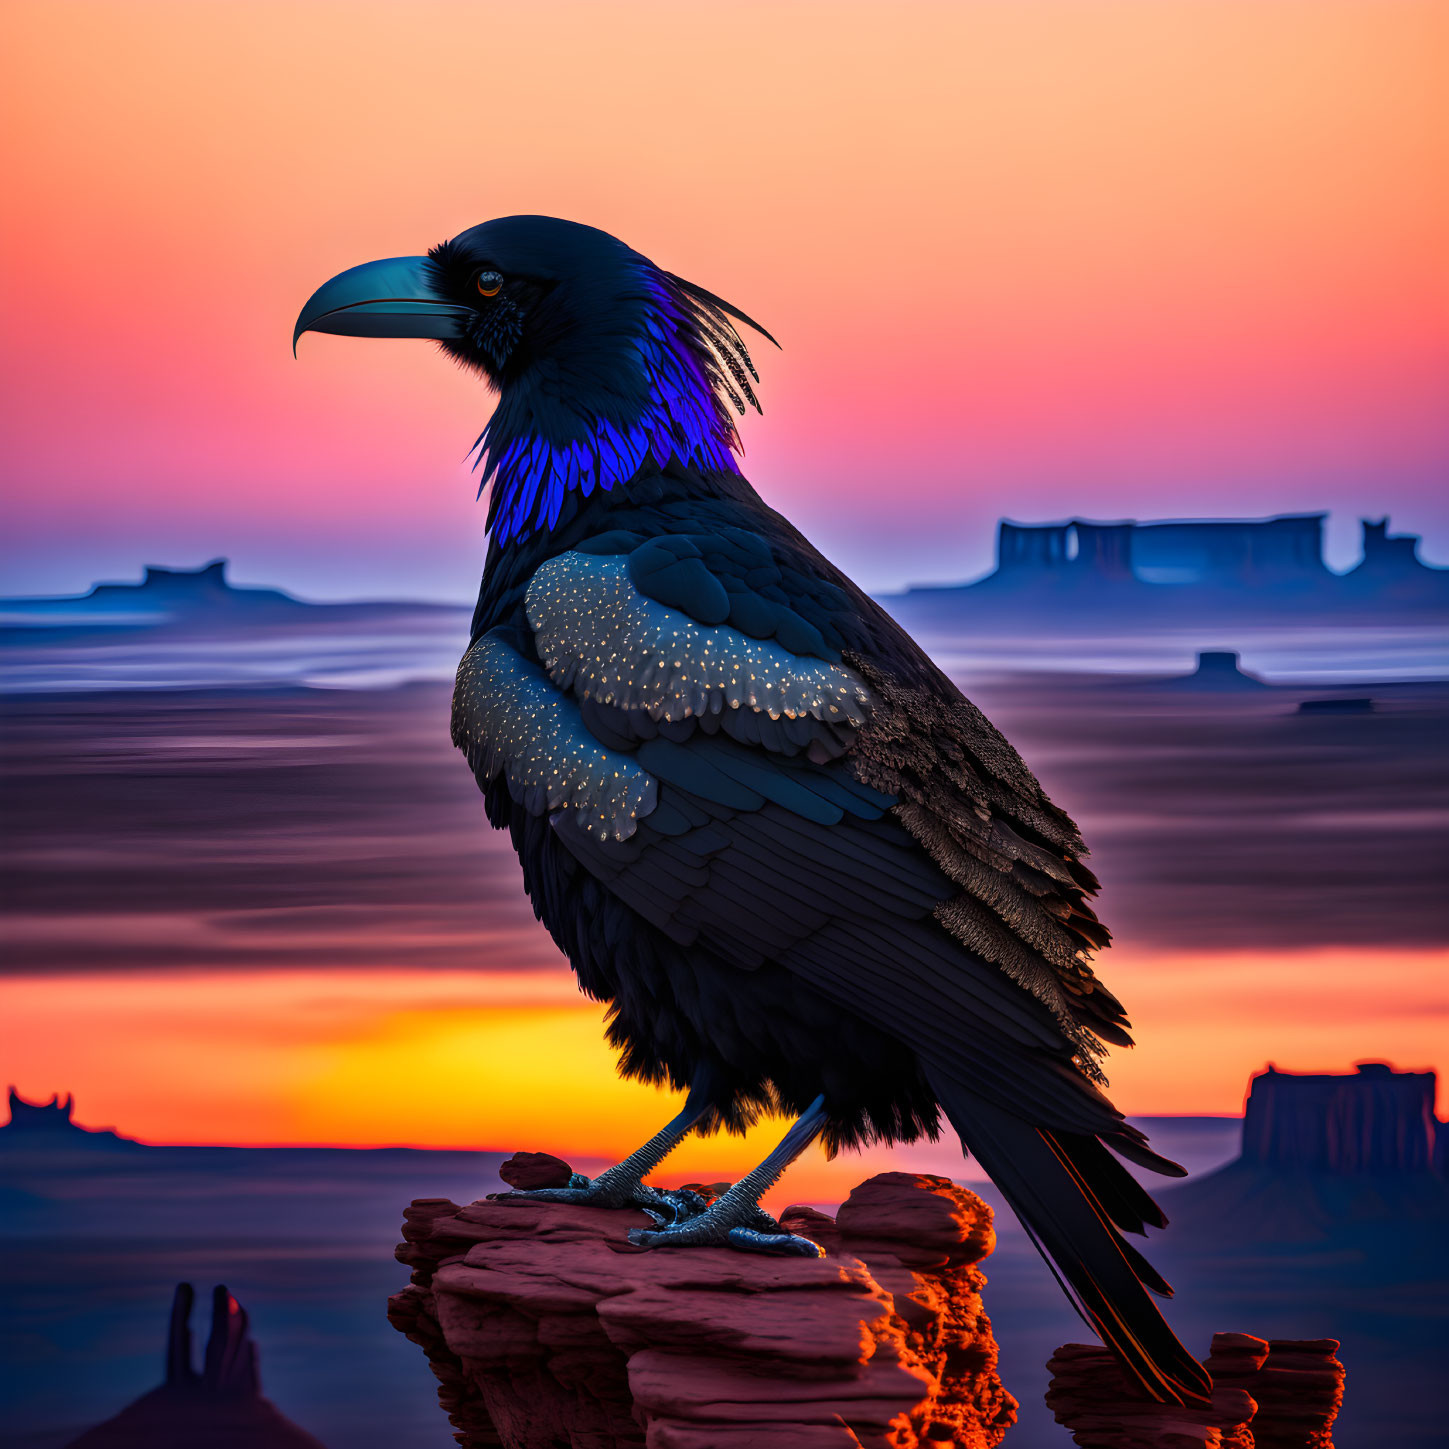 Vibrant sunset with colorful raven on rock and silhouetted mesas